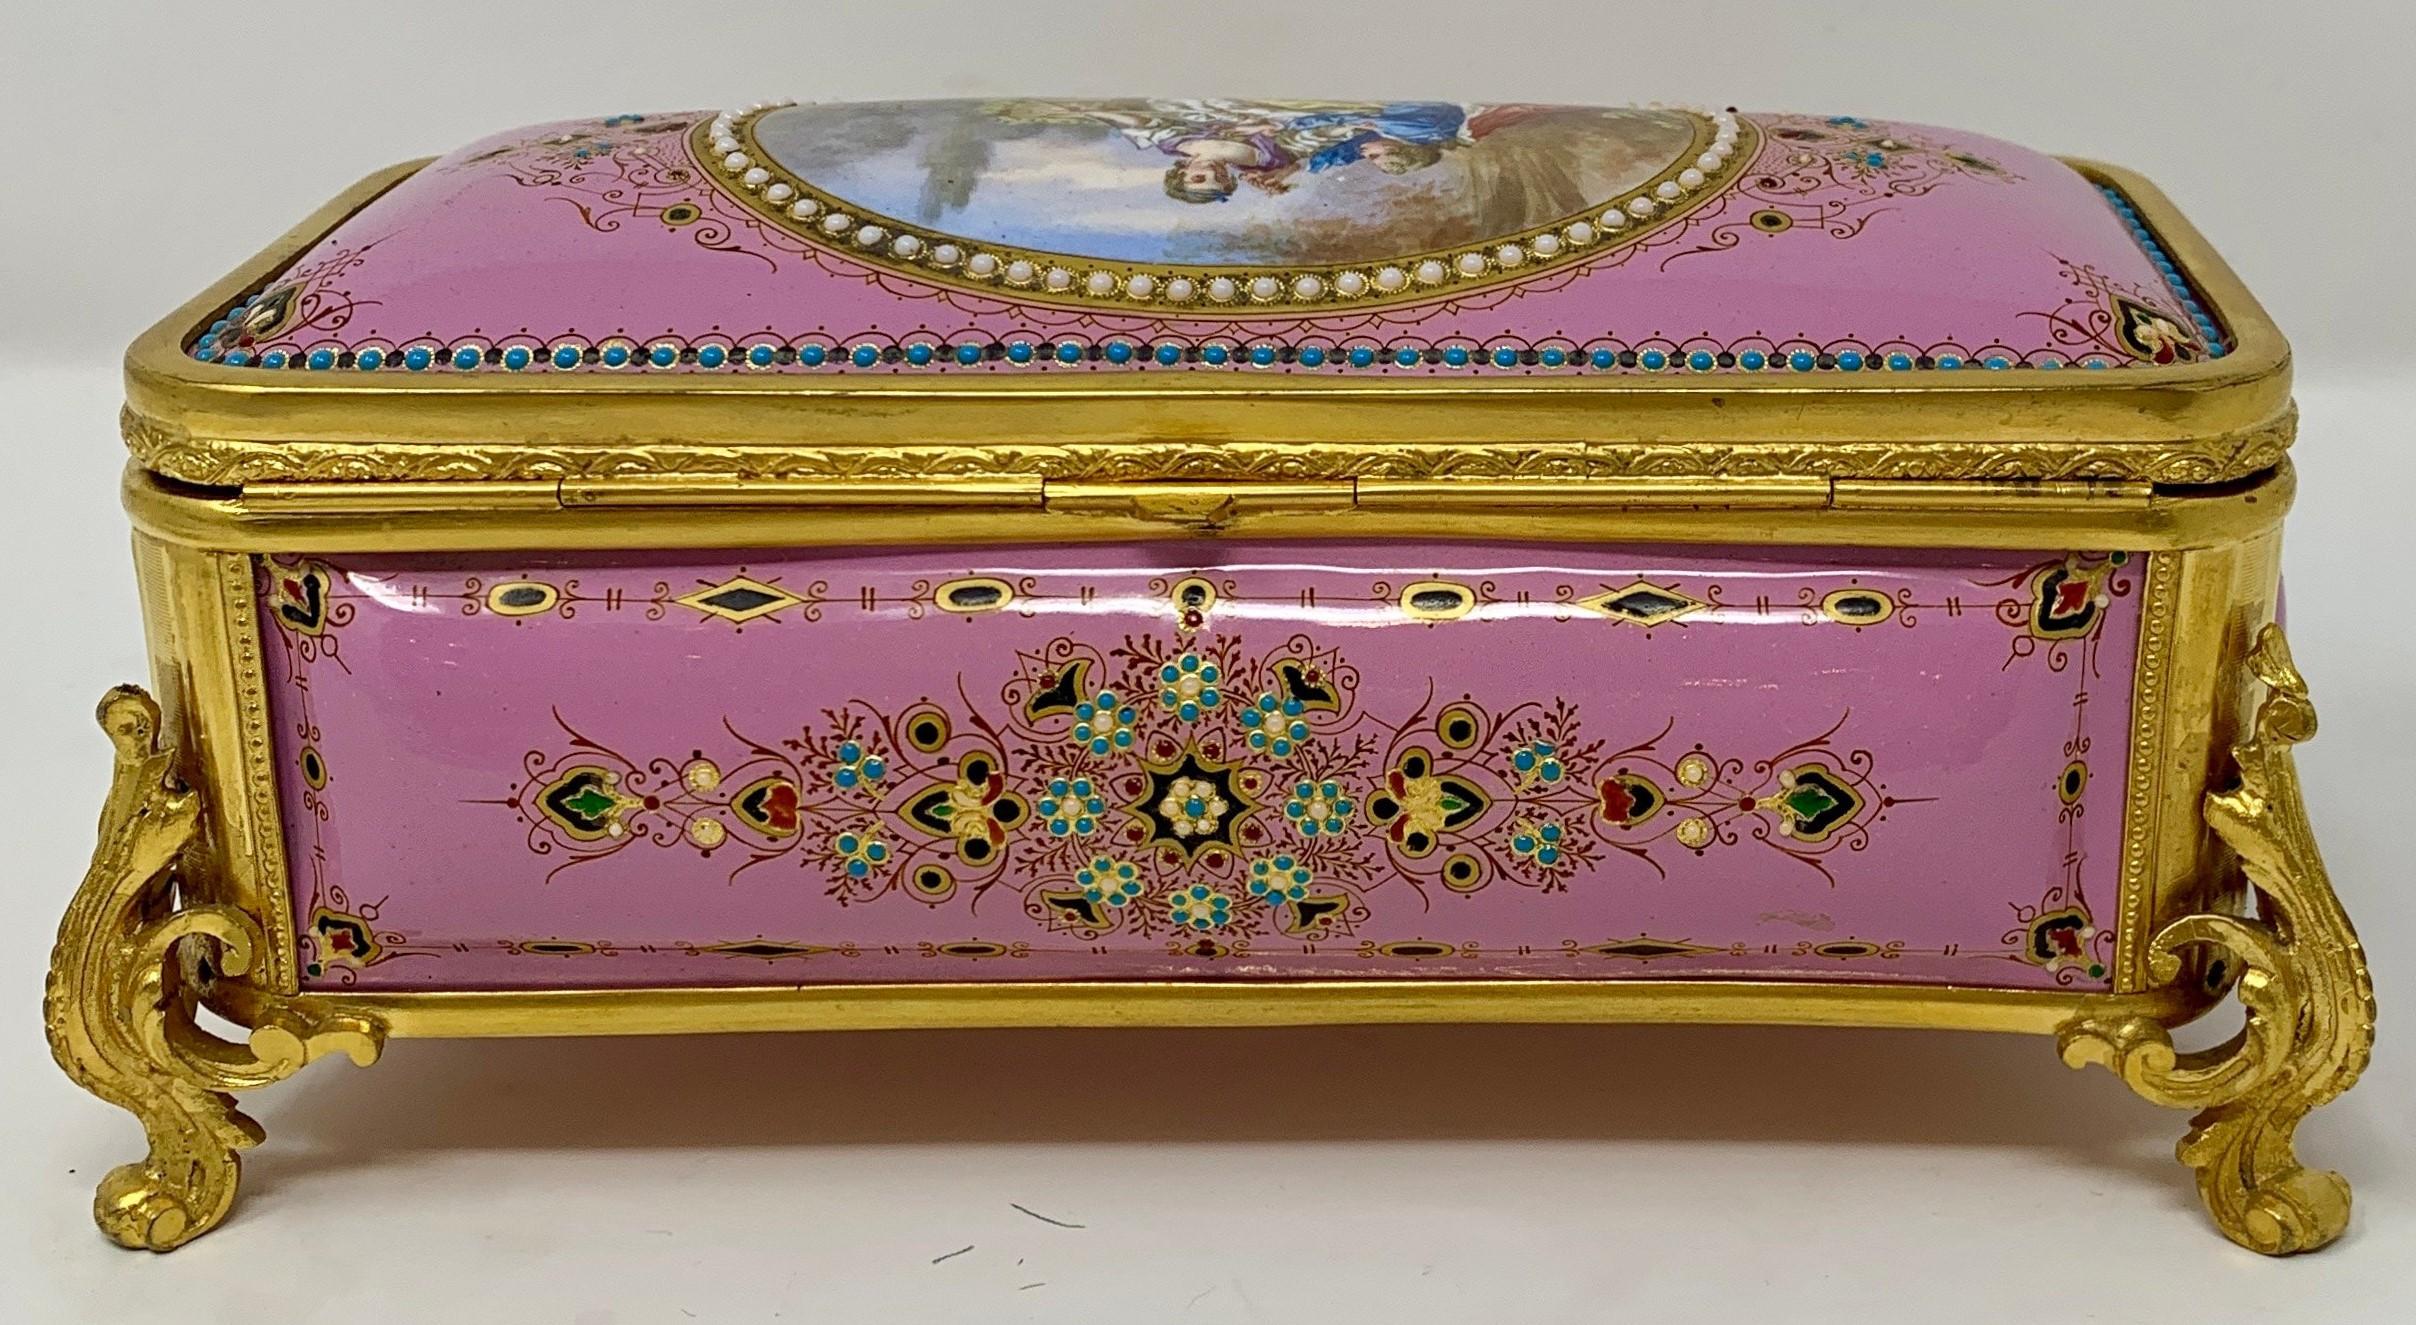 19th Century Antique French Pink Enameled Ormolu Box, circa 1860-1870 For Sale